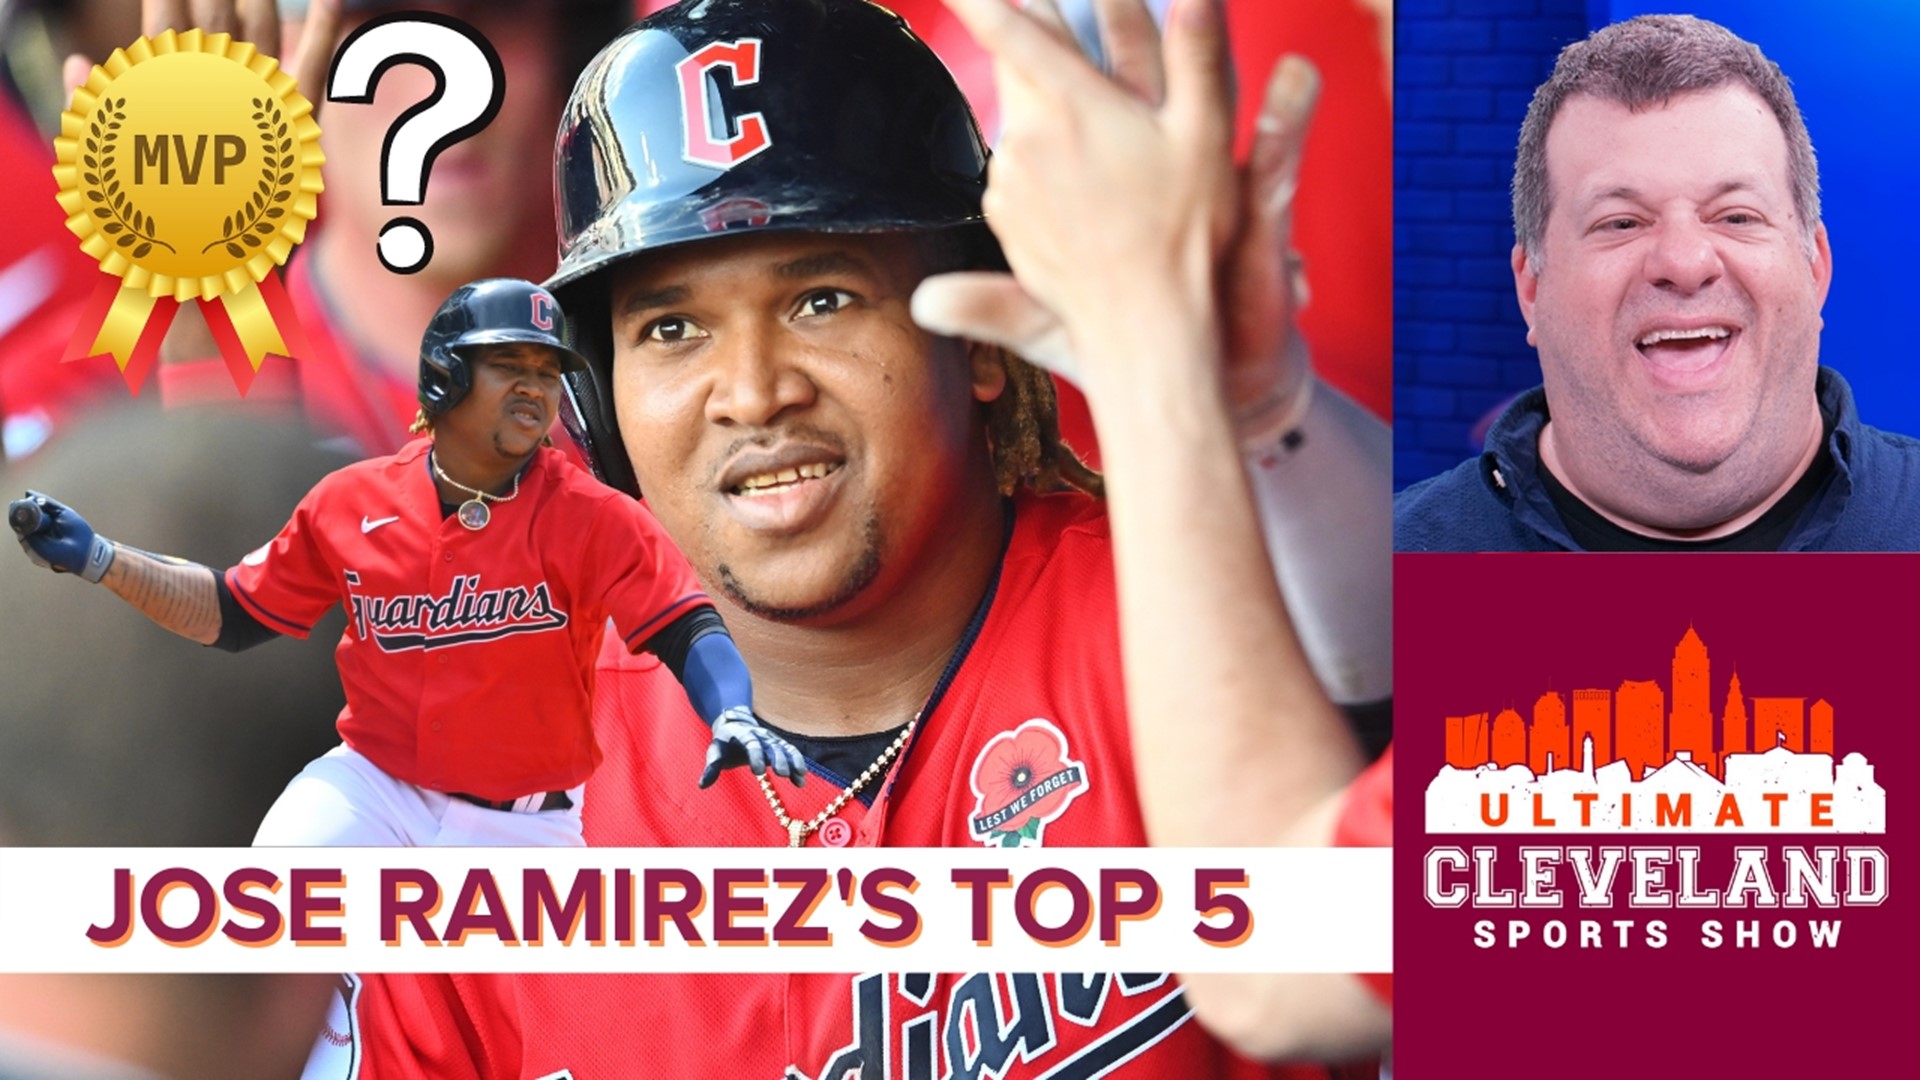 The UCSS crew discusses how Jose Ramirez is making history with the Cleveland  Guardians.